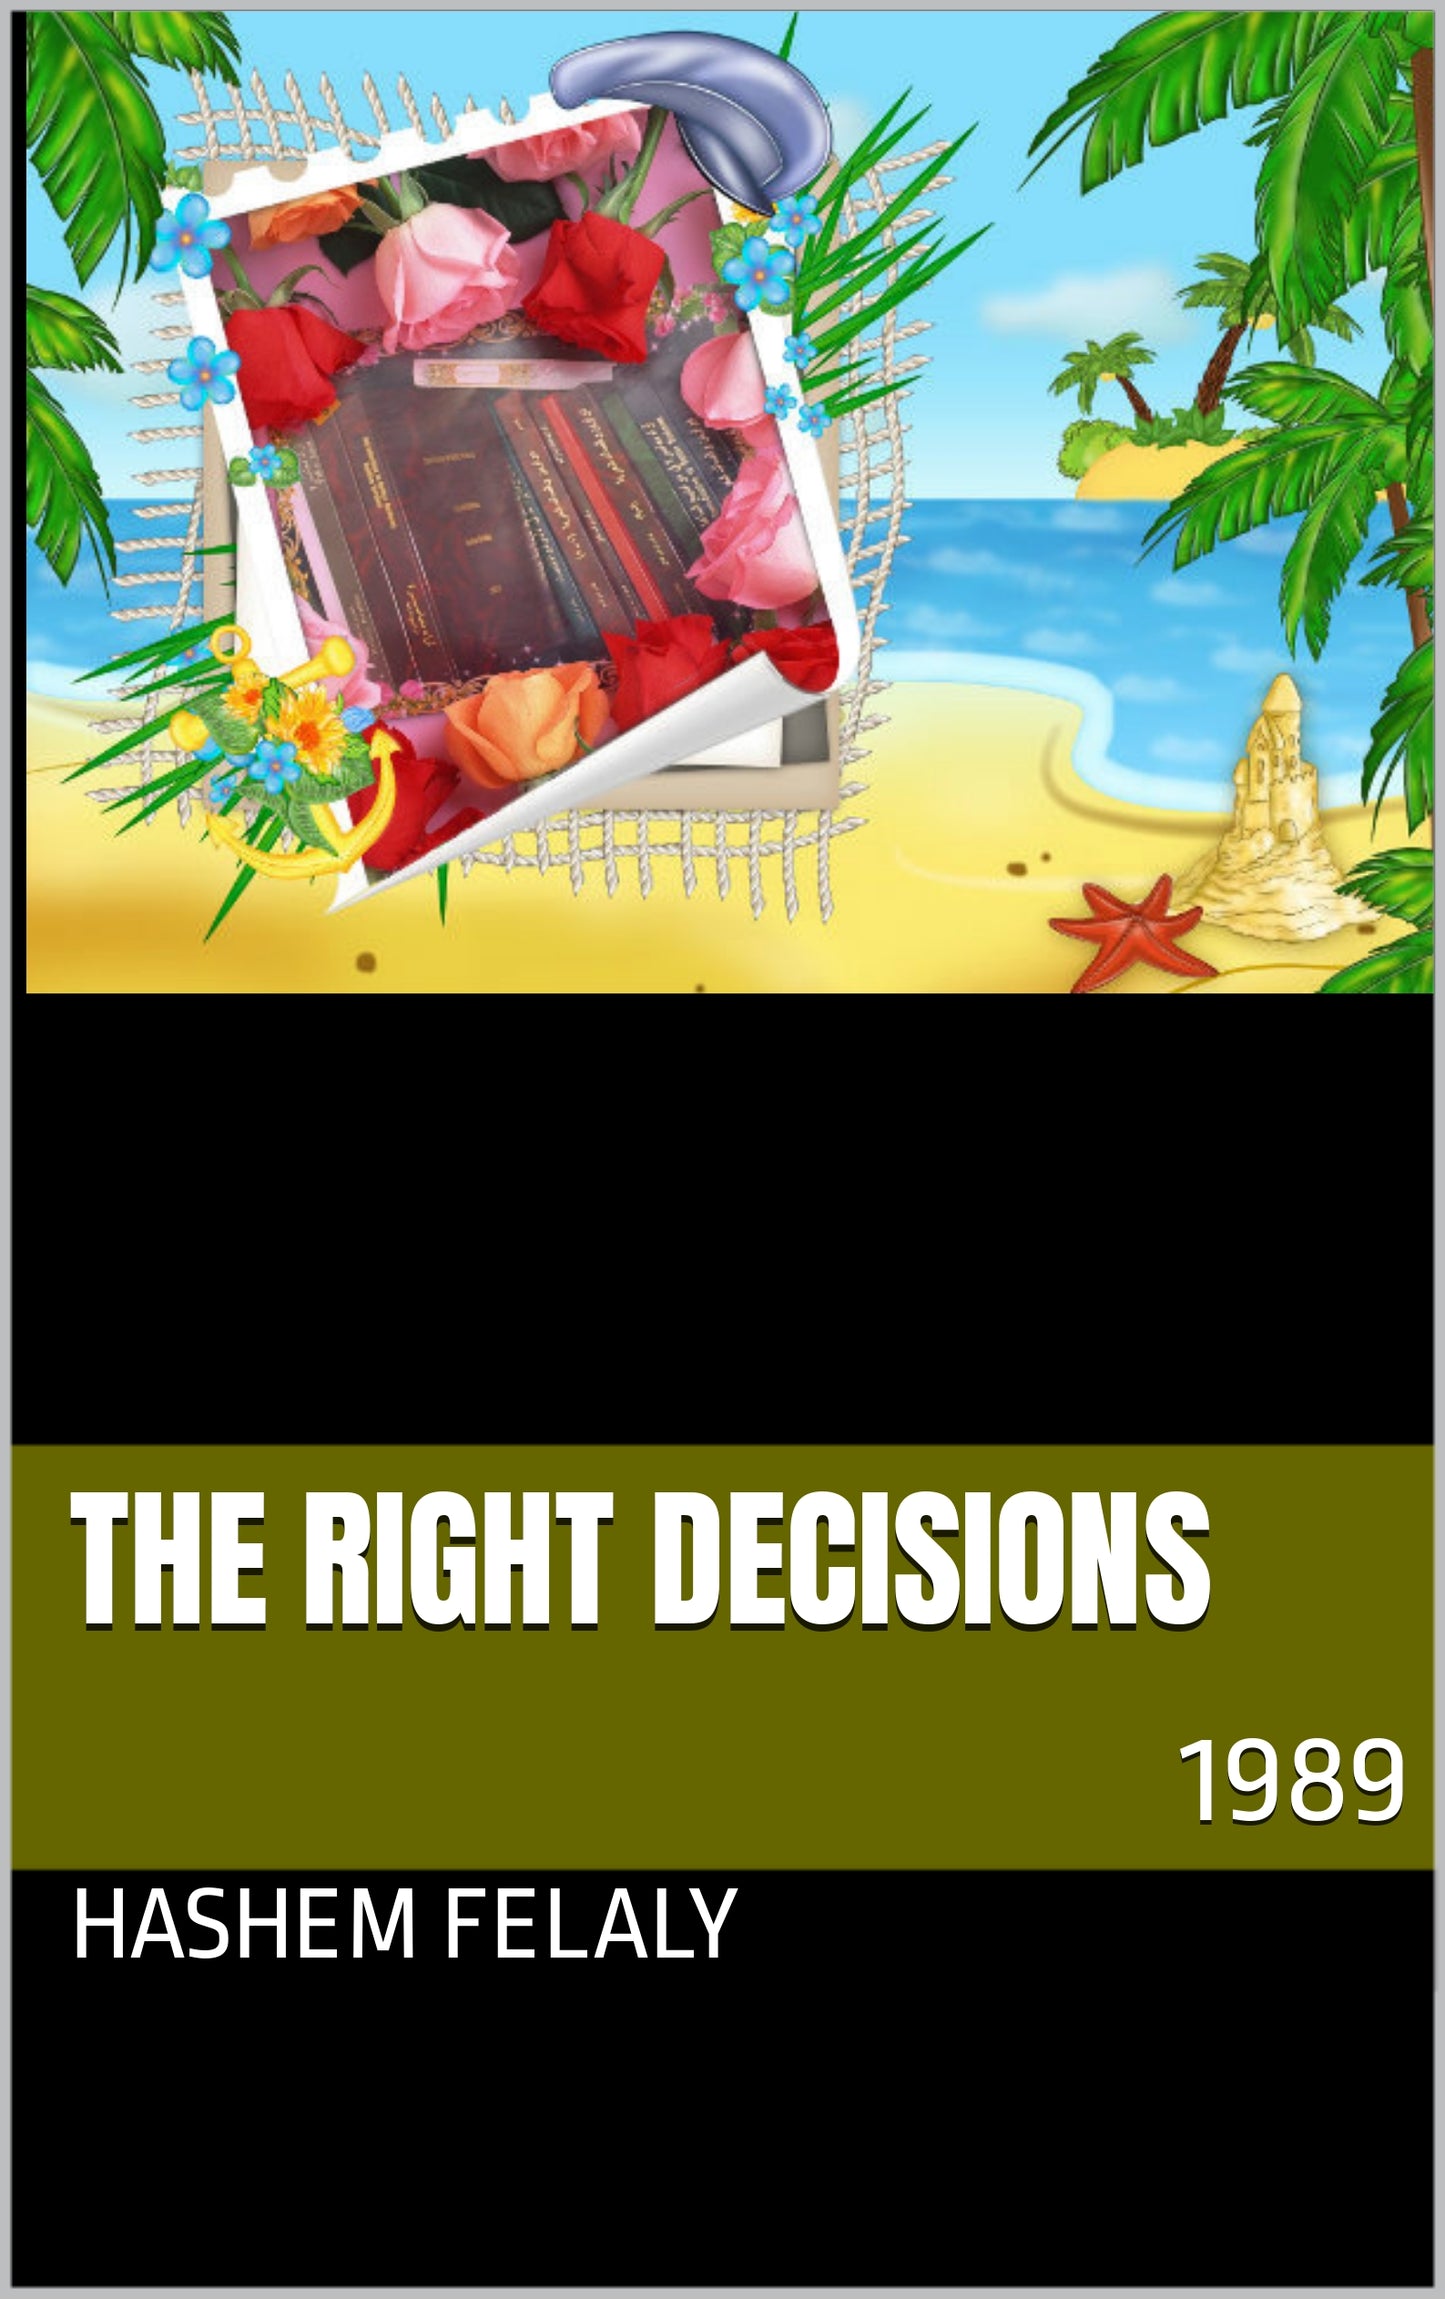 The right decisions